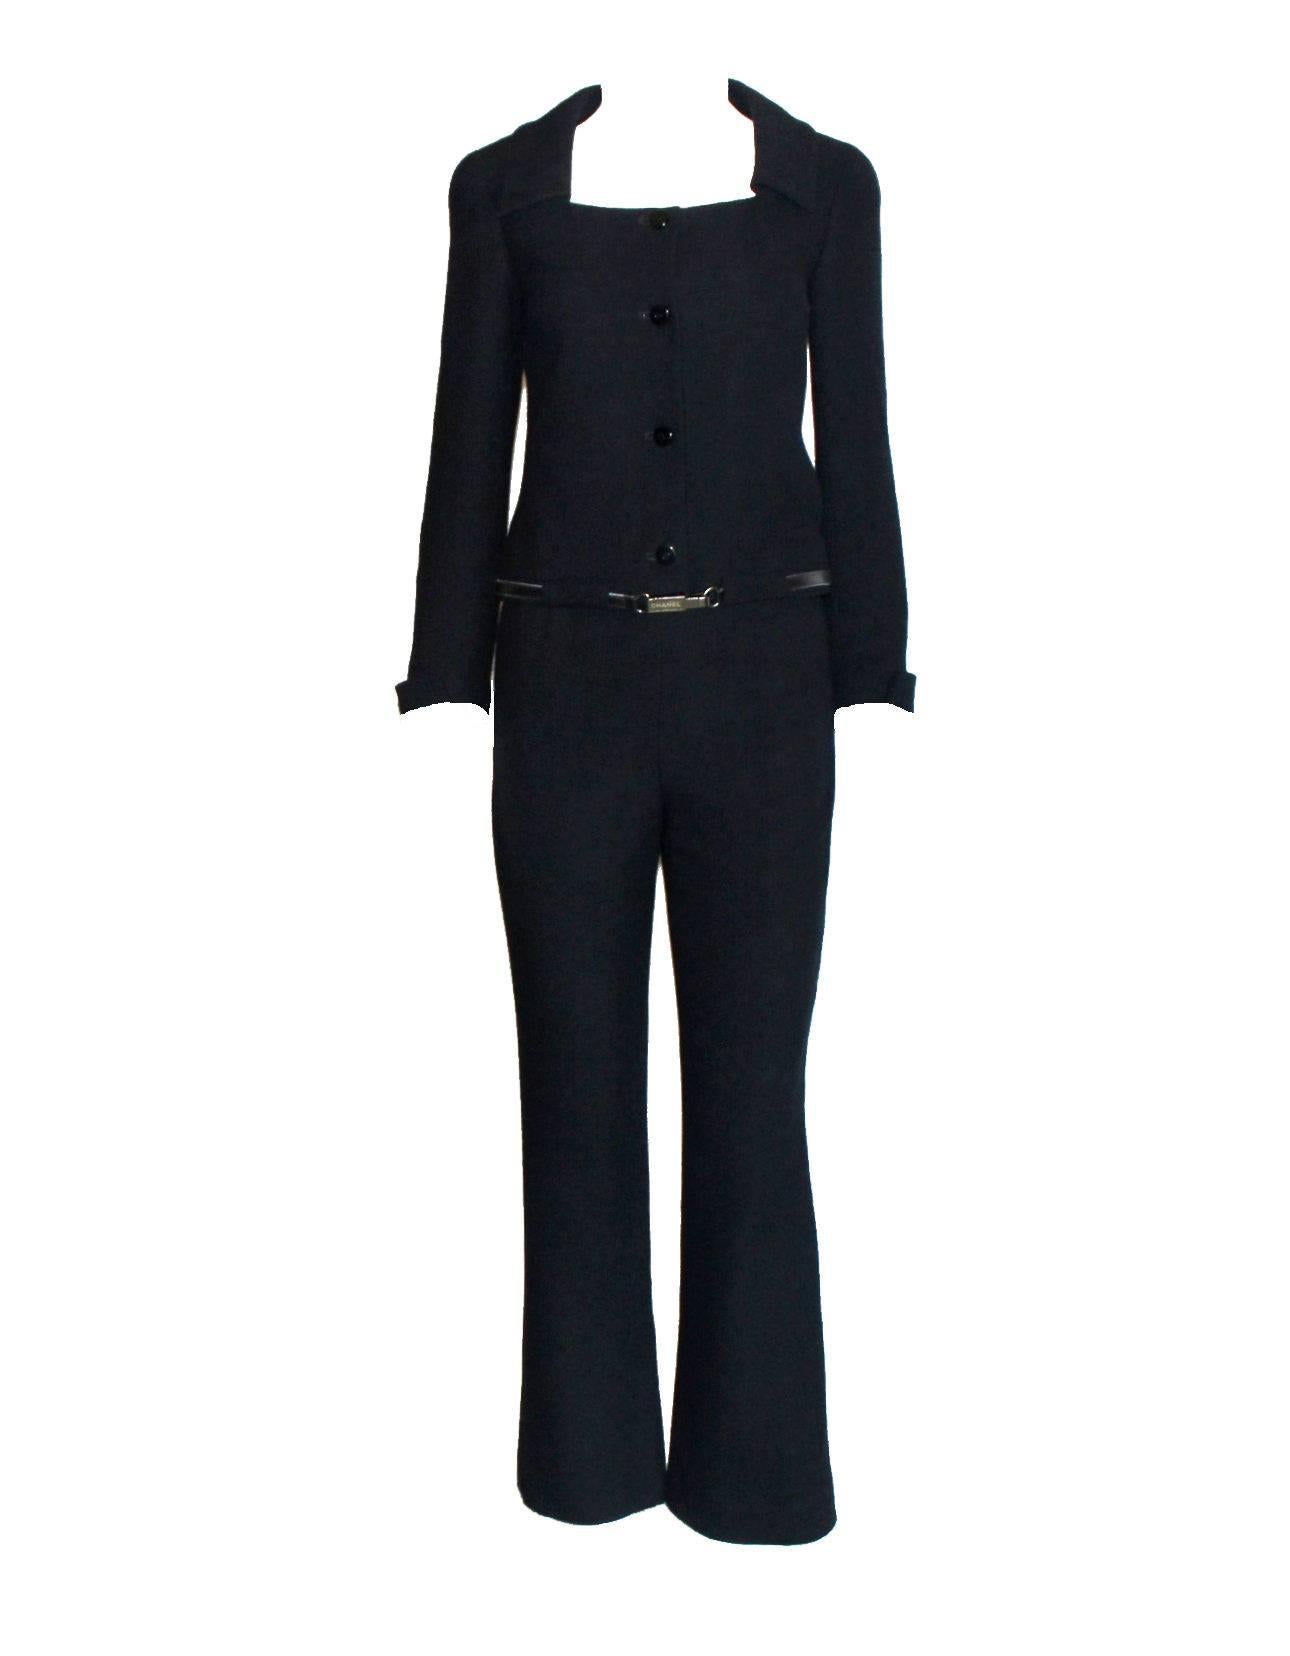 Beautiful CHANEL silk suit designed by Karl Lagerfeld
A true CHANEL signature item that will last you for many years
One of the most iconic CHANEL pieces created
Consisting of three pieces, jacket, belt and trousers
Can be worn as a a statement suit